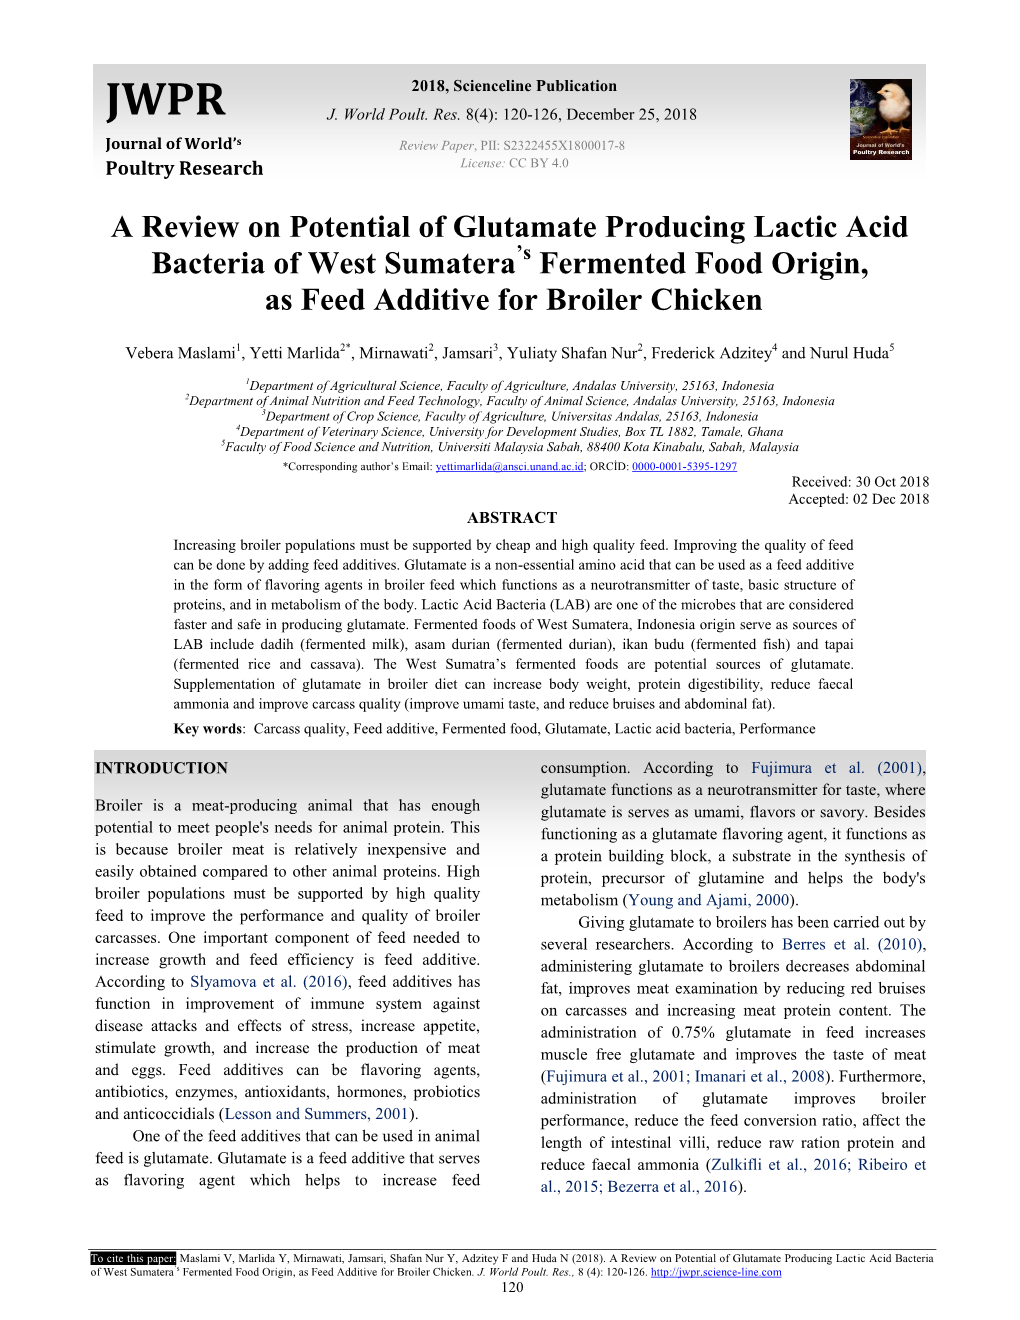 A Review on Potential of Glutamate Producing Lactic Acid Bacteria of West Sumatera's Fermented Food Origin, As Feed Additive F